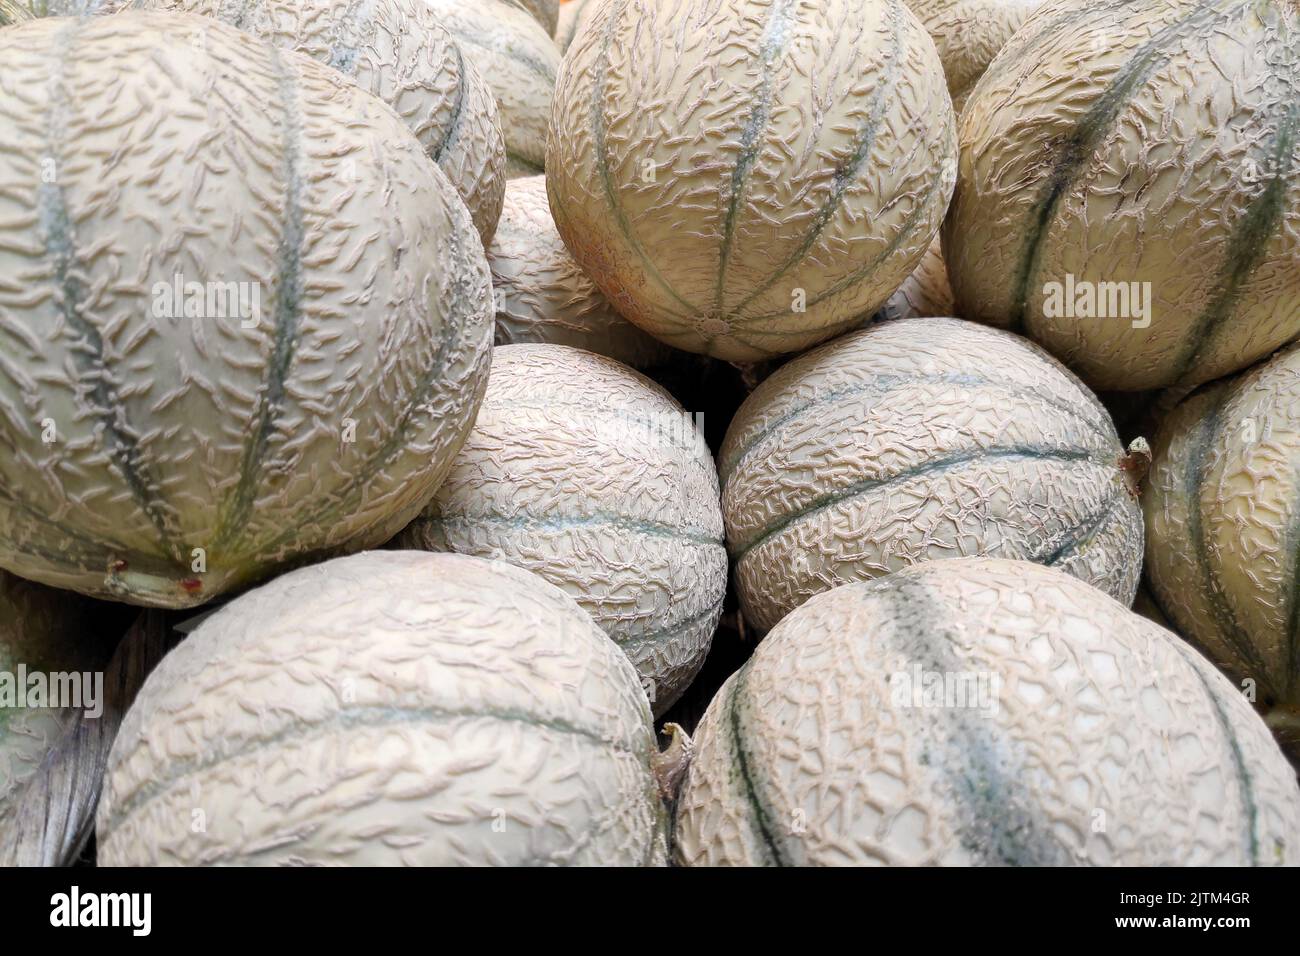 Full frame close-up on a stack of cantaloupes on a market stall. Stock Photo